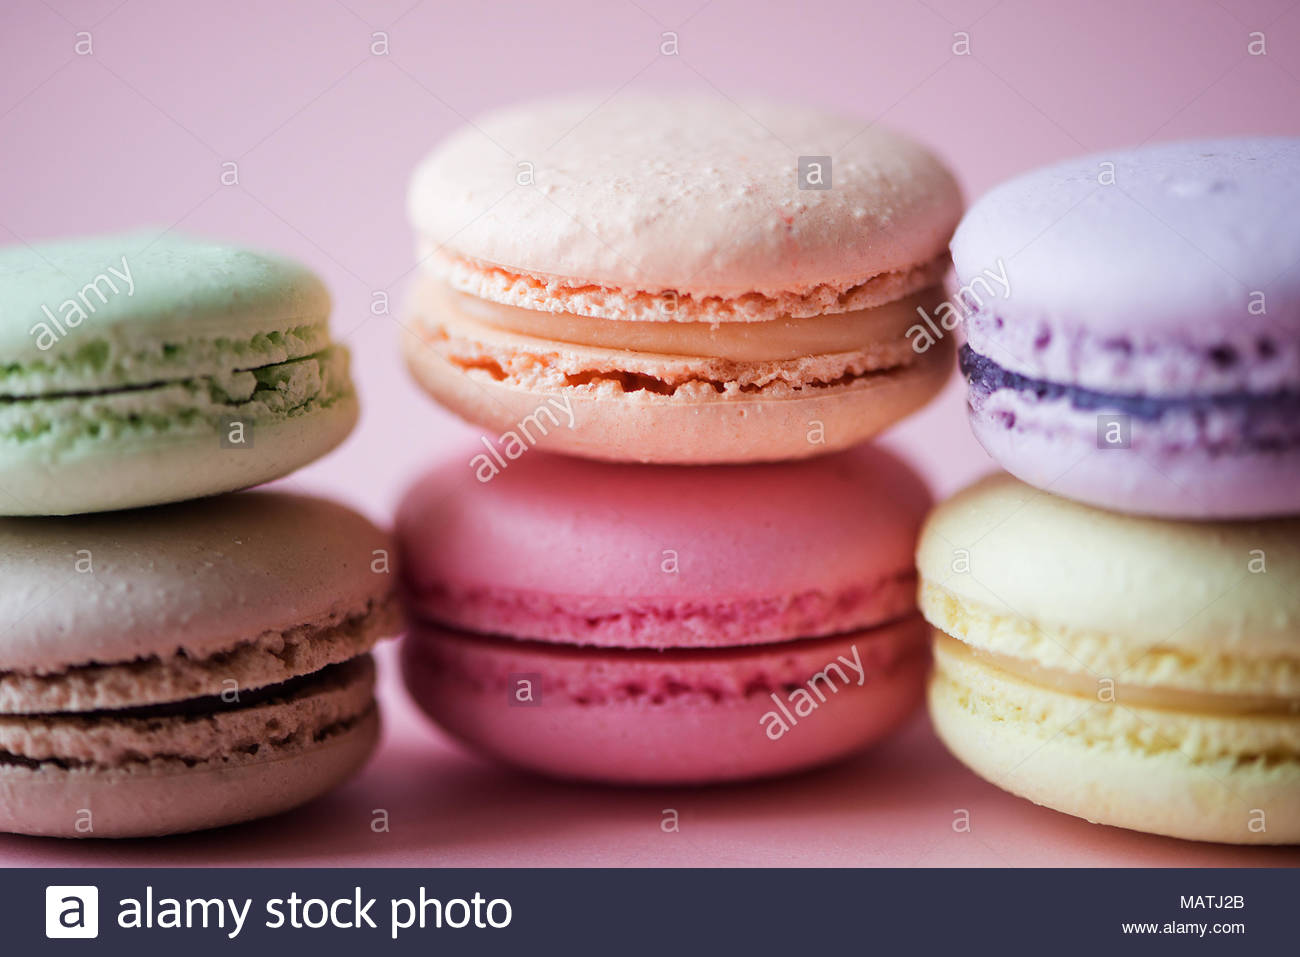 Sweet French Macaroons Cake Or Macarons With Vintage Pastel